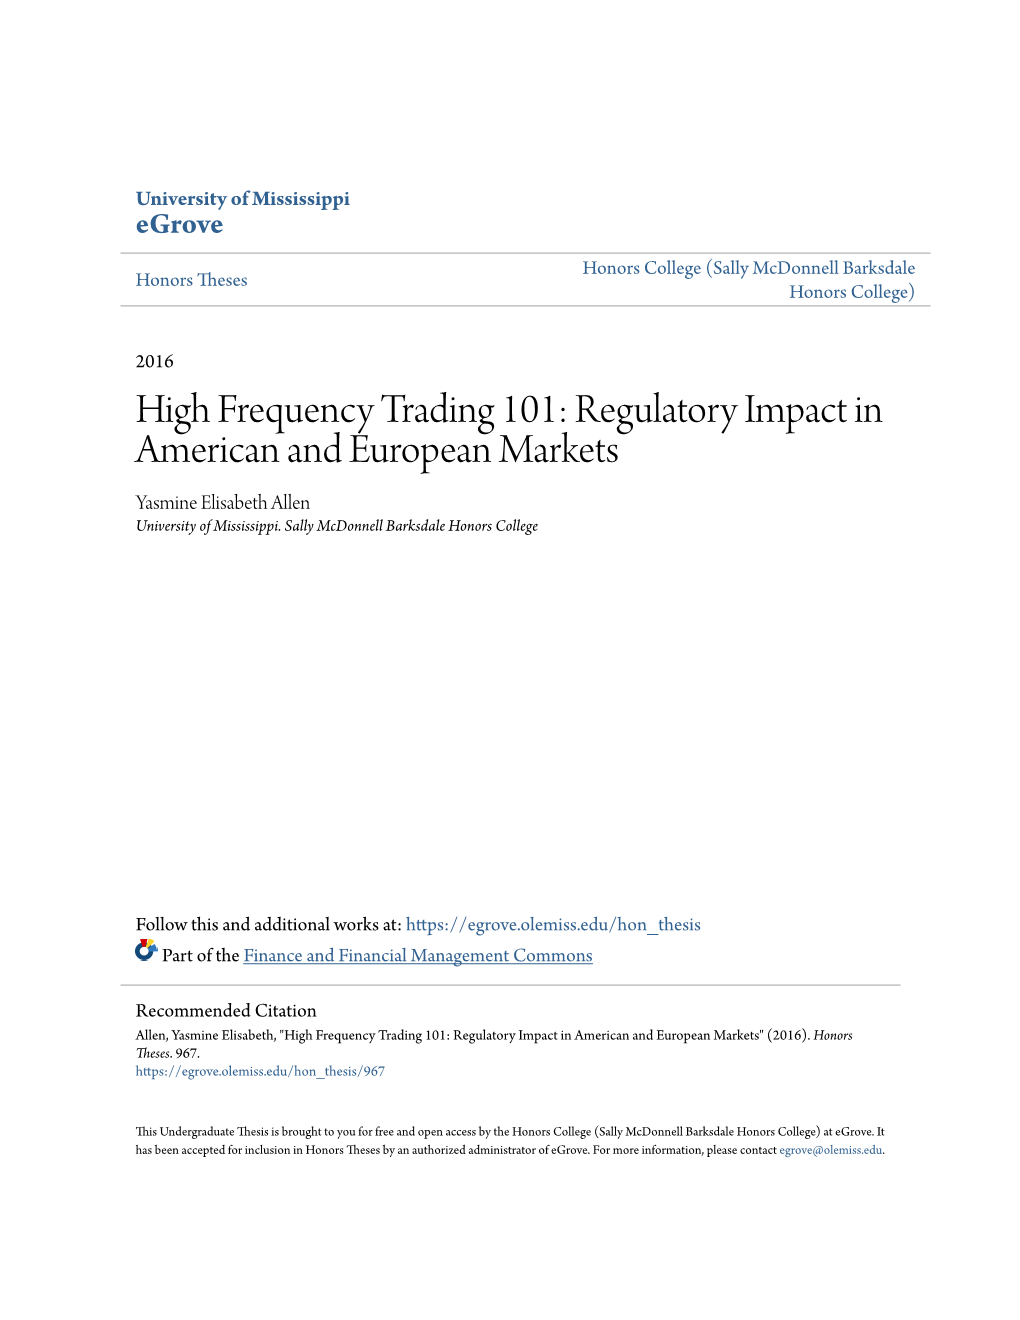 High Frequency Trading 101: Regulatory Impact in American and European Markets Yasmine Elisabeth Allen University of Mississippi